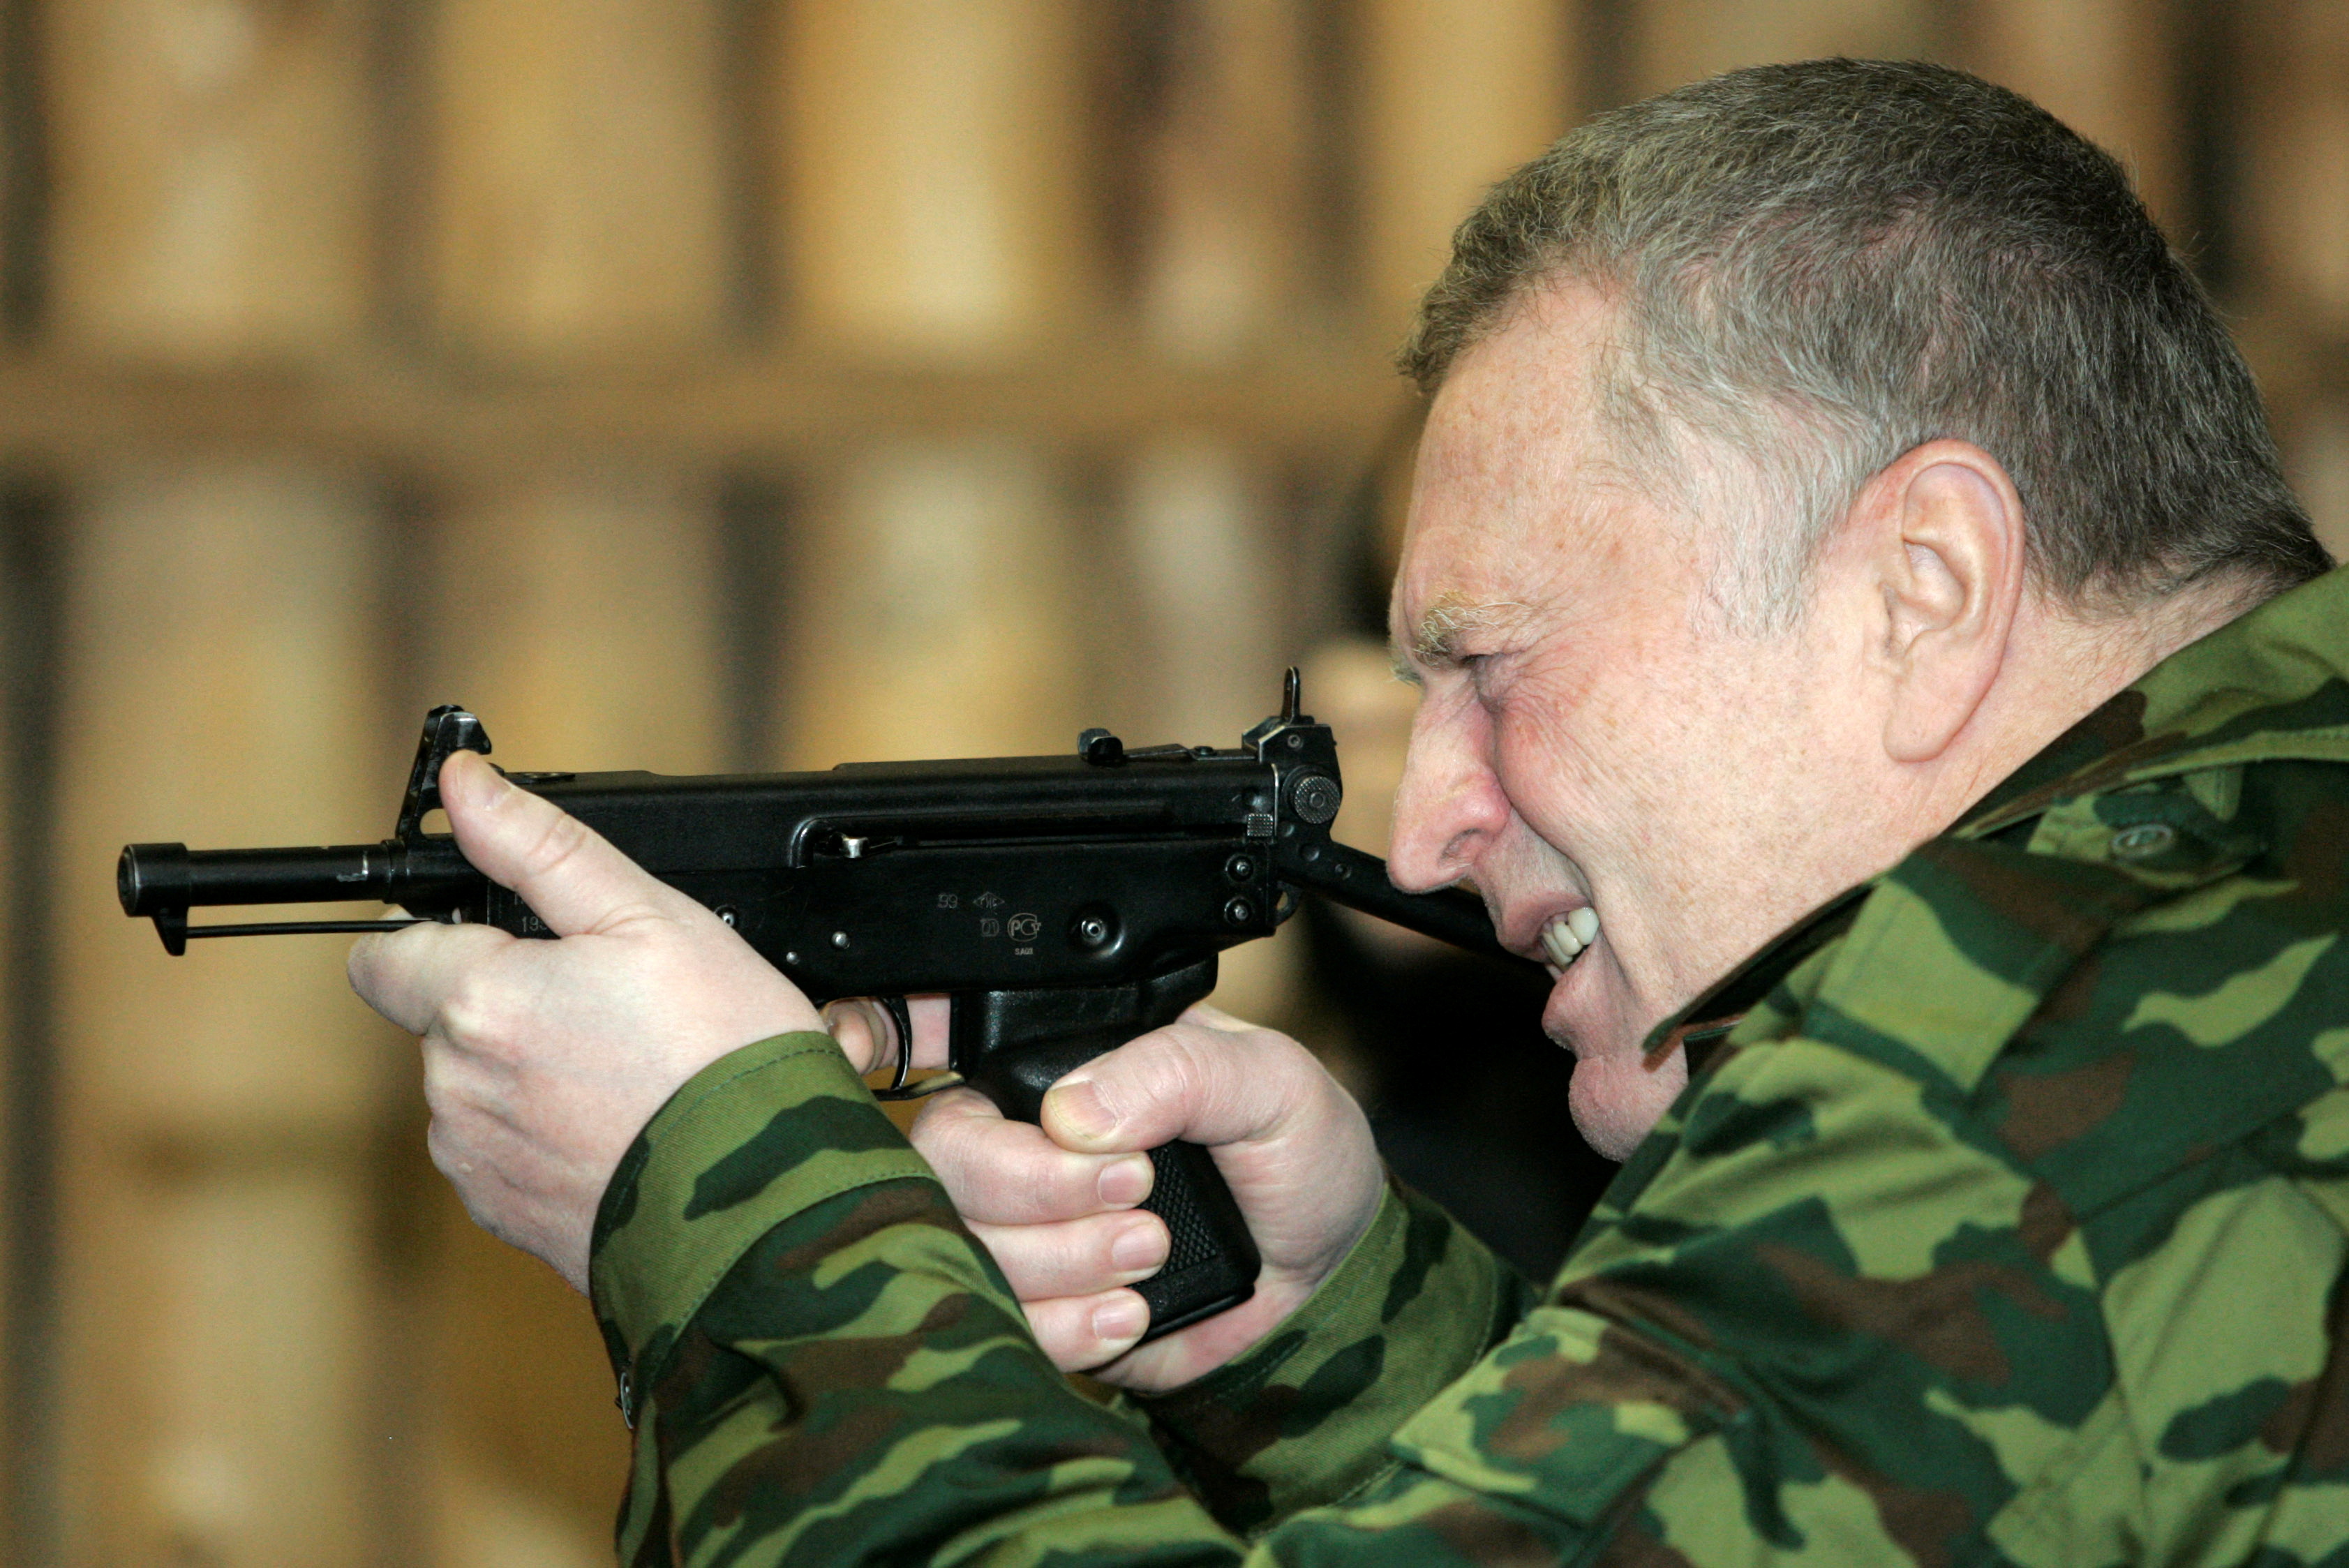 Leader of the nationalist LDPR party and presidential candidate Zhirinovsky takes aim at a shooting range in Chernogolovka